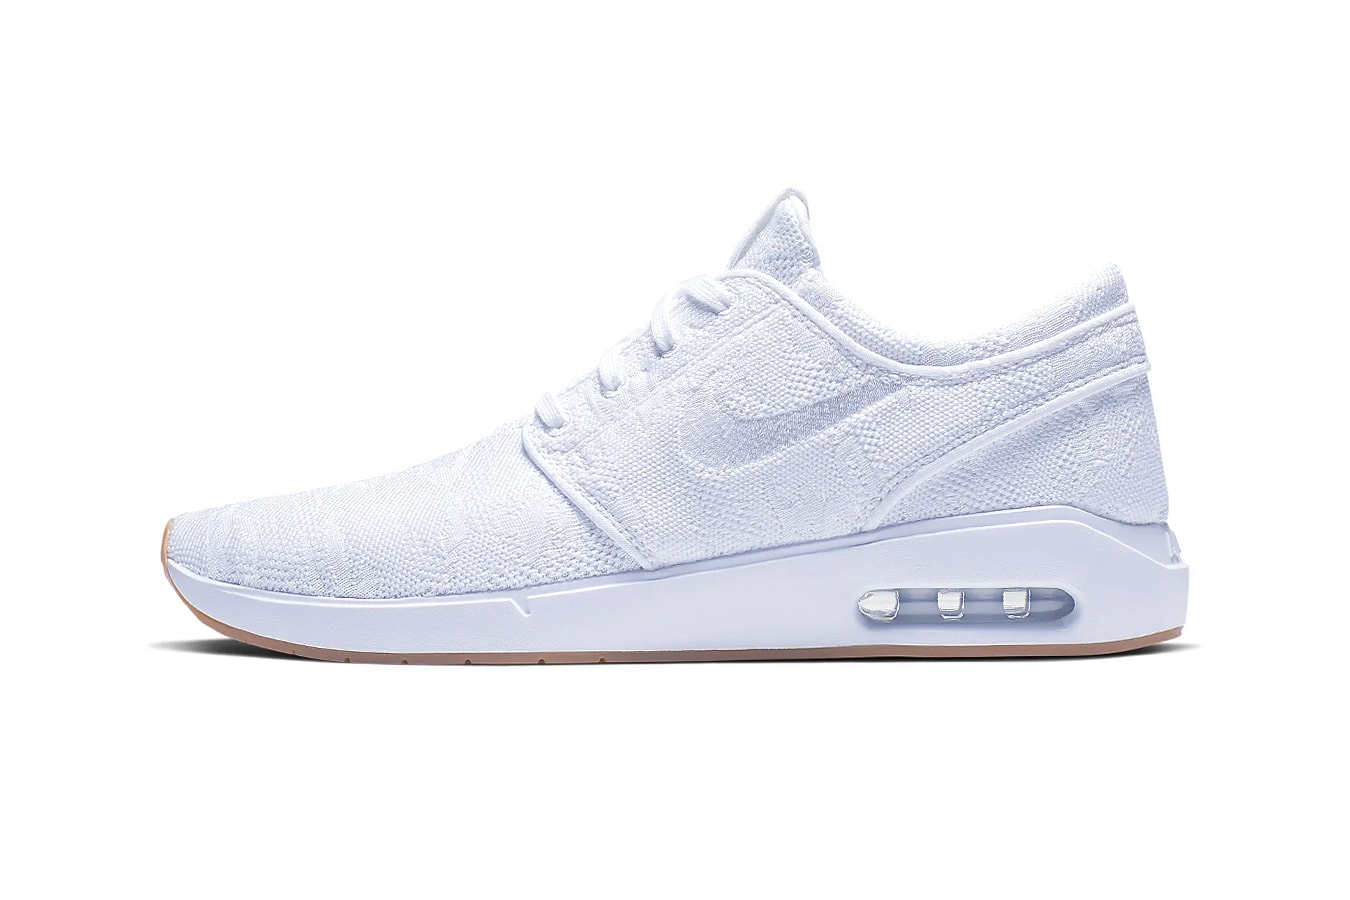 After 10 Years Nike Finally Introduces the Janoski 2 nike sb skateboarding lifestyle skate shoe release info price drop DB2714 "Ash Pearl/Ash Pearl/Off White"